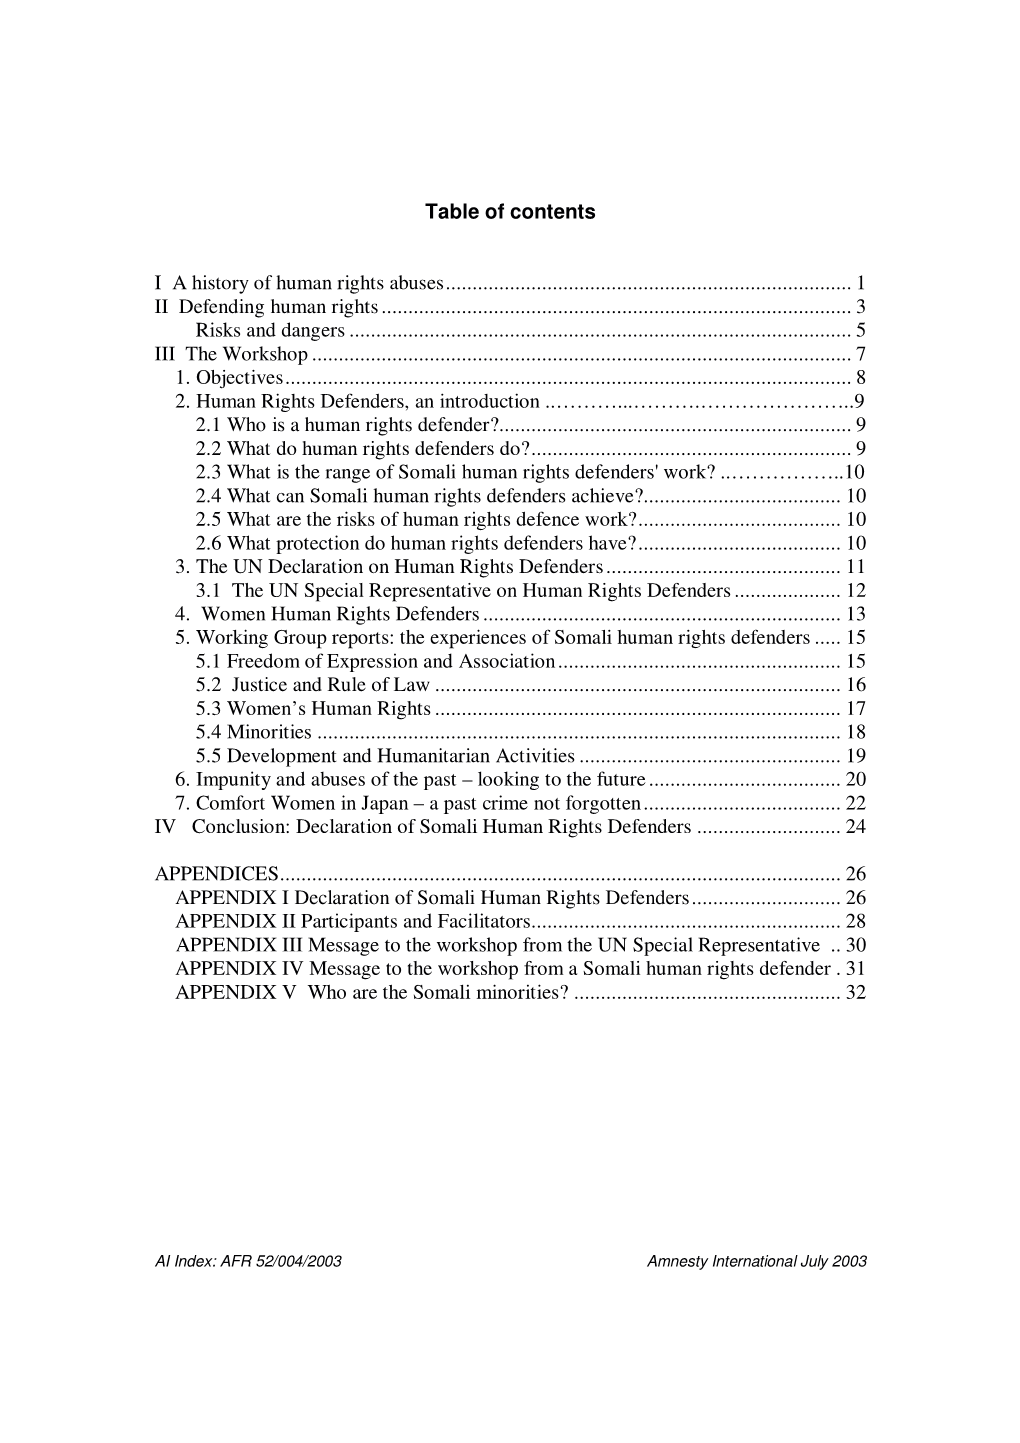 Table of Contents I a History of Human Rights Abuses